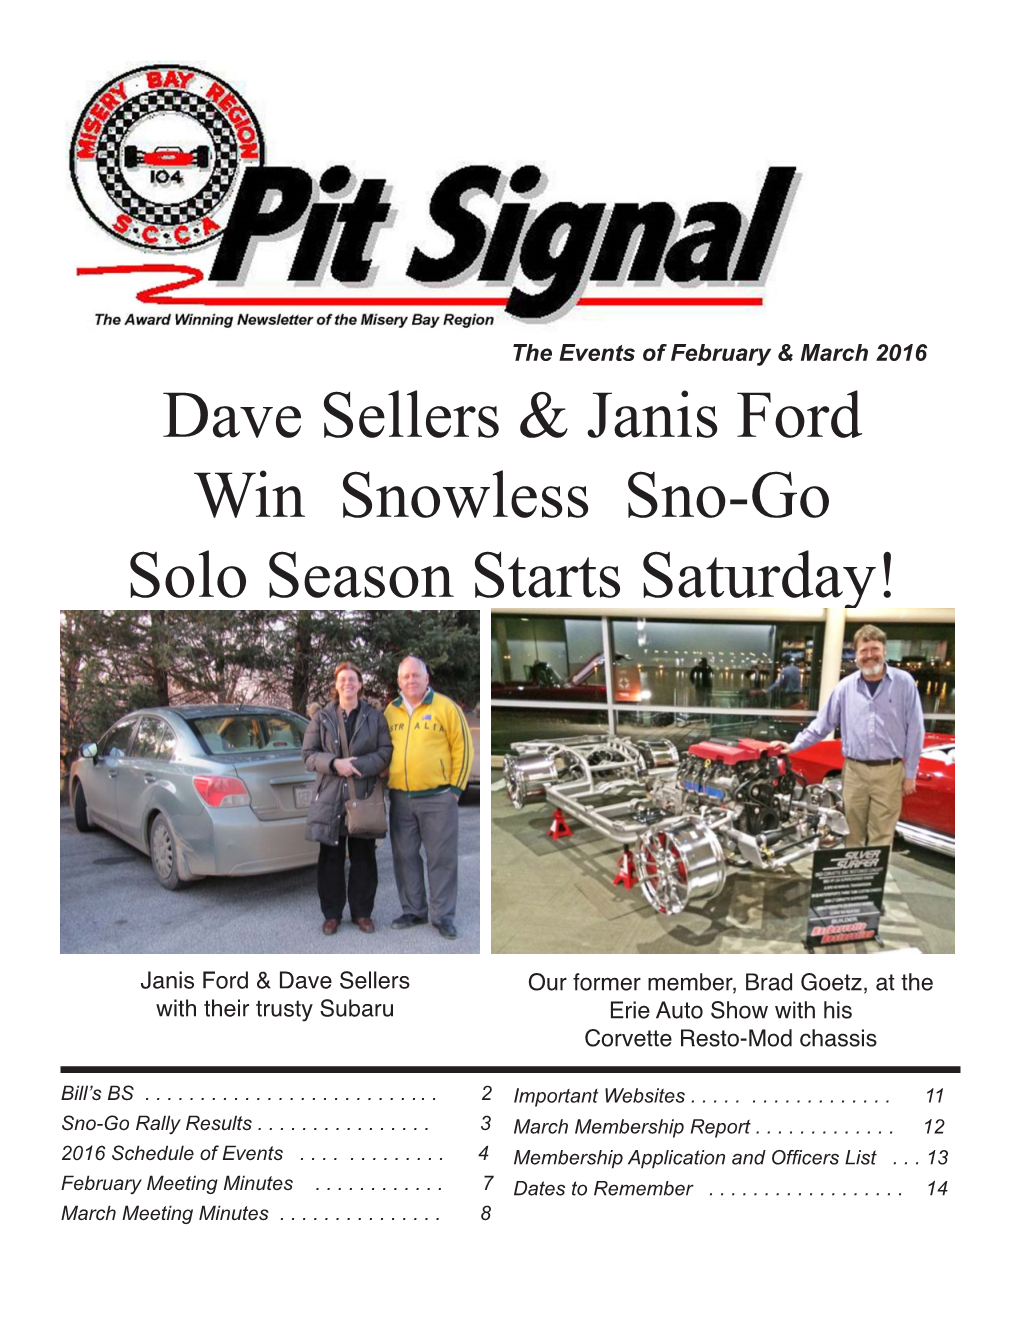 Dave Sellers & Janis Ford Win Snowless Sno-Go Solo Season